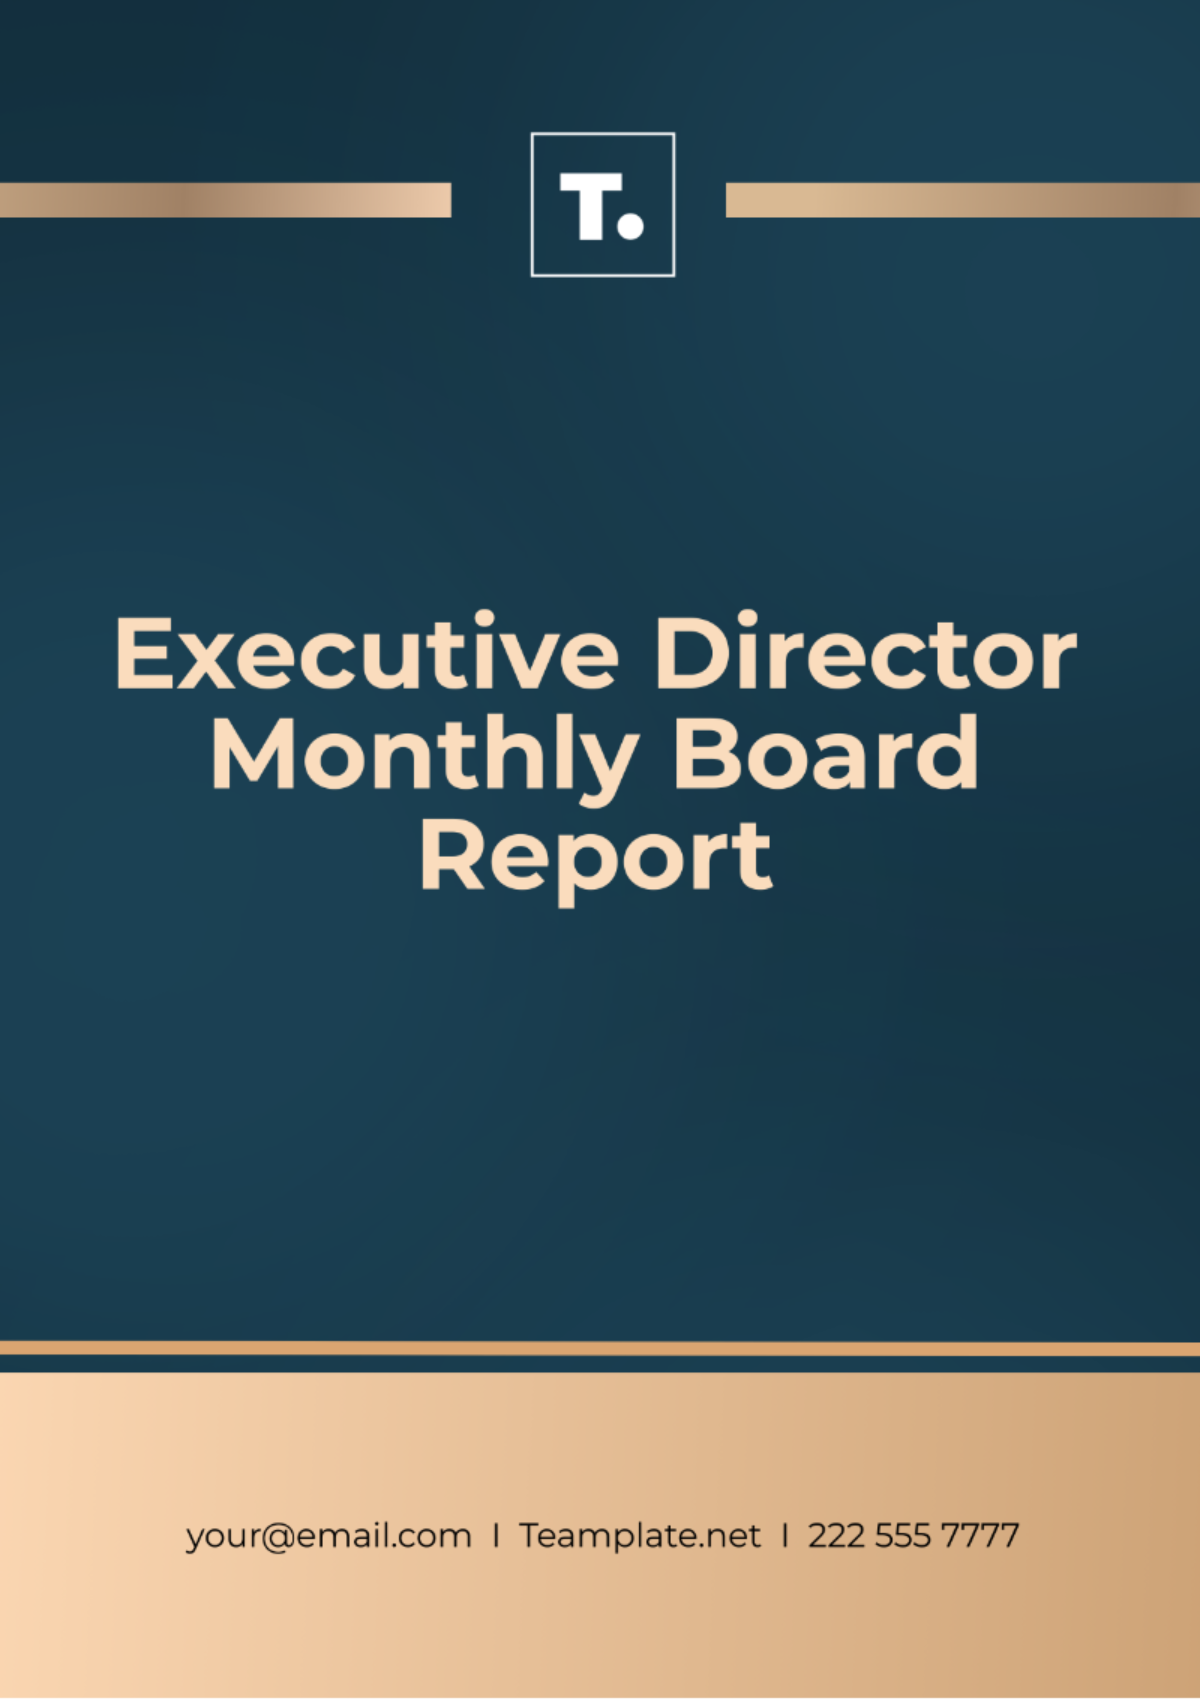 Executive Director Monthly Board Report Template